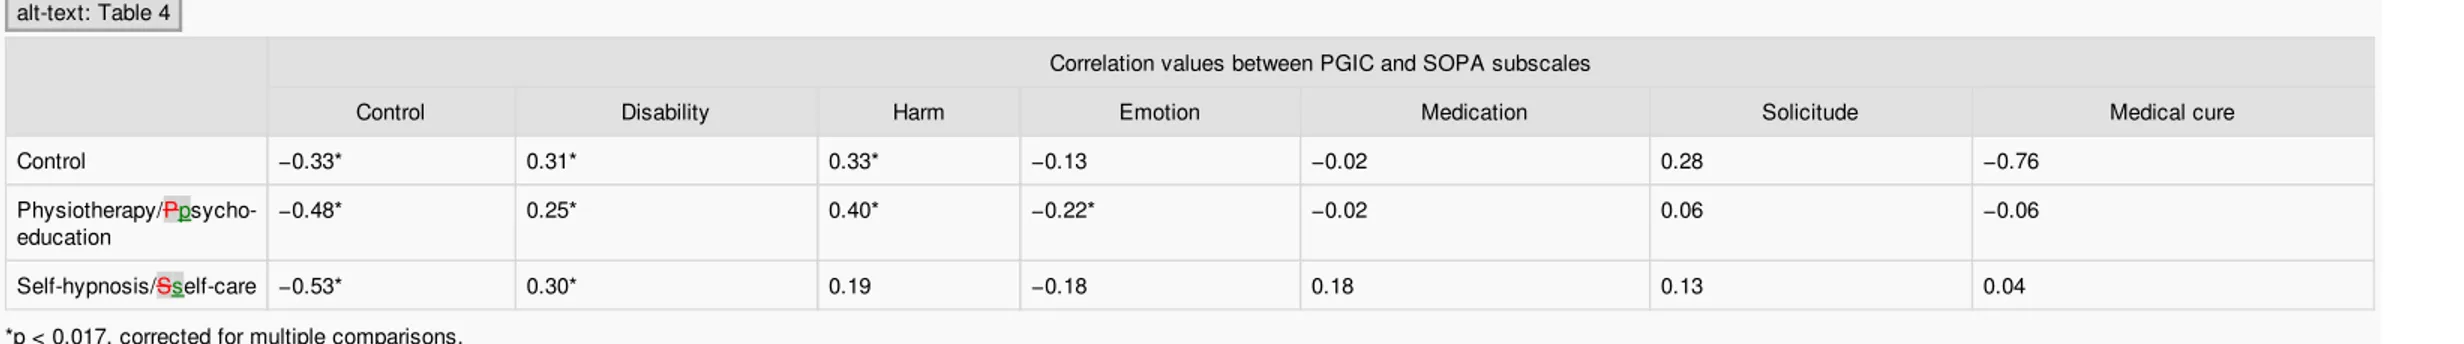 Table 4 Correlation between the Patients' Global Impression of Change (PGIC) and Survey of Pain Attitudes (SOPA) subscales.